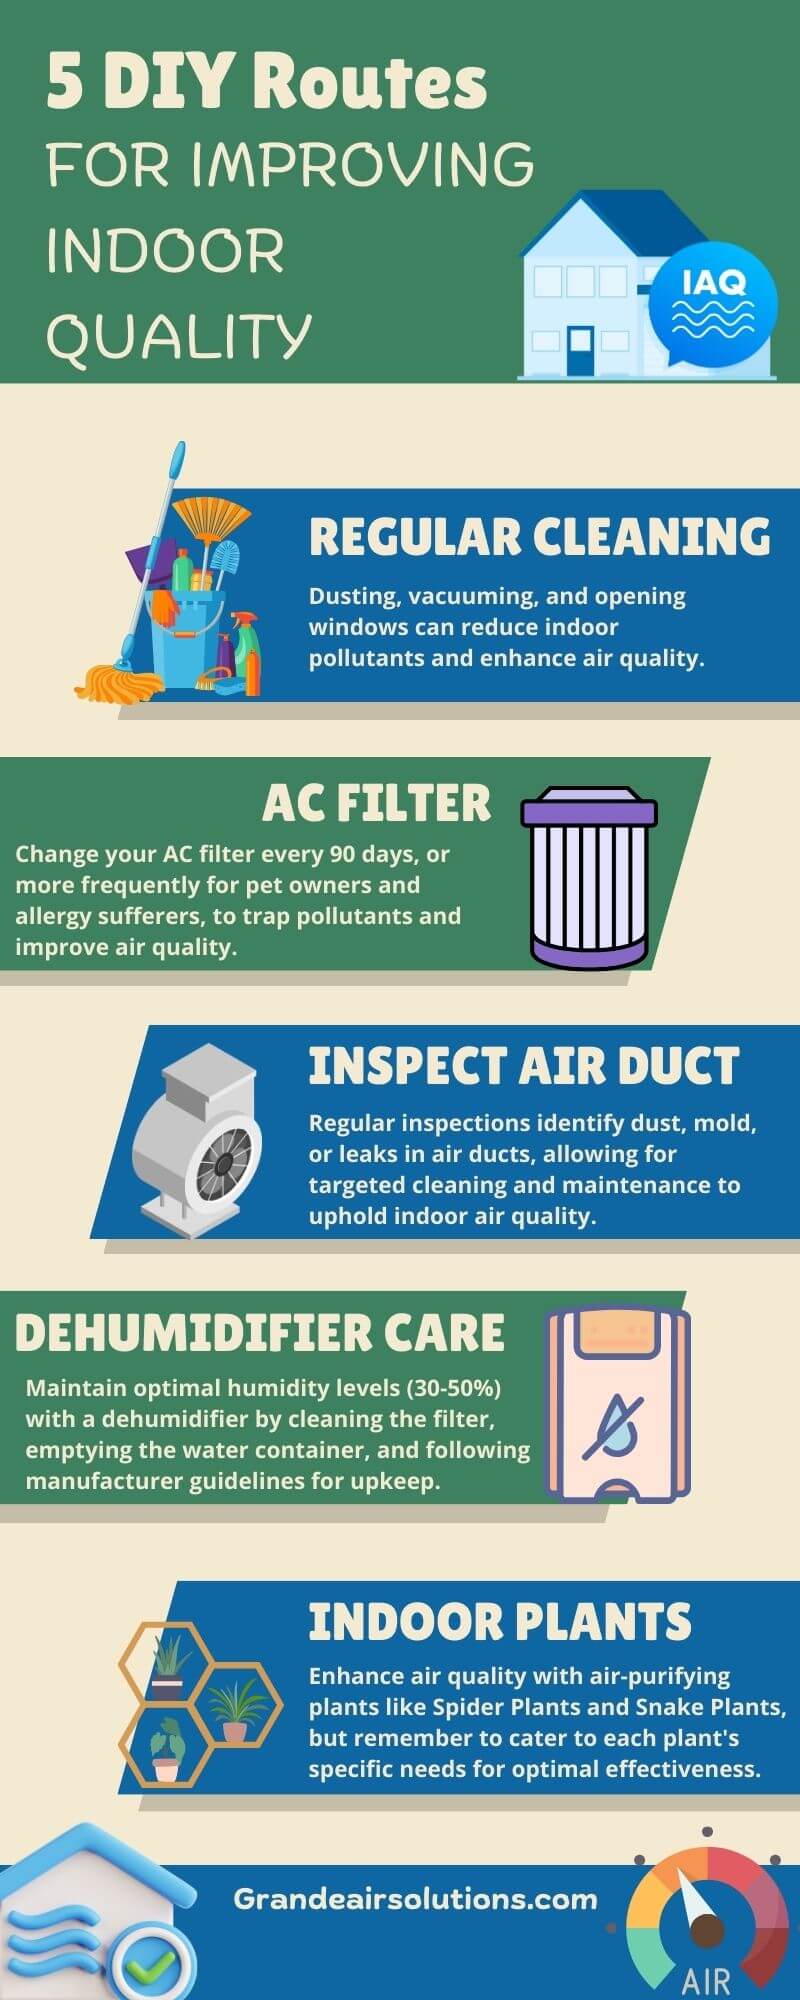 DIY tips for improving indoor air quality